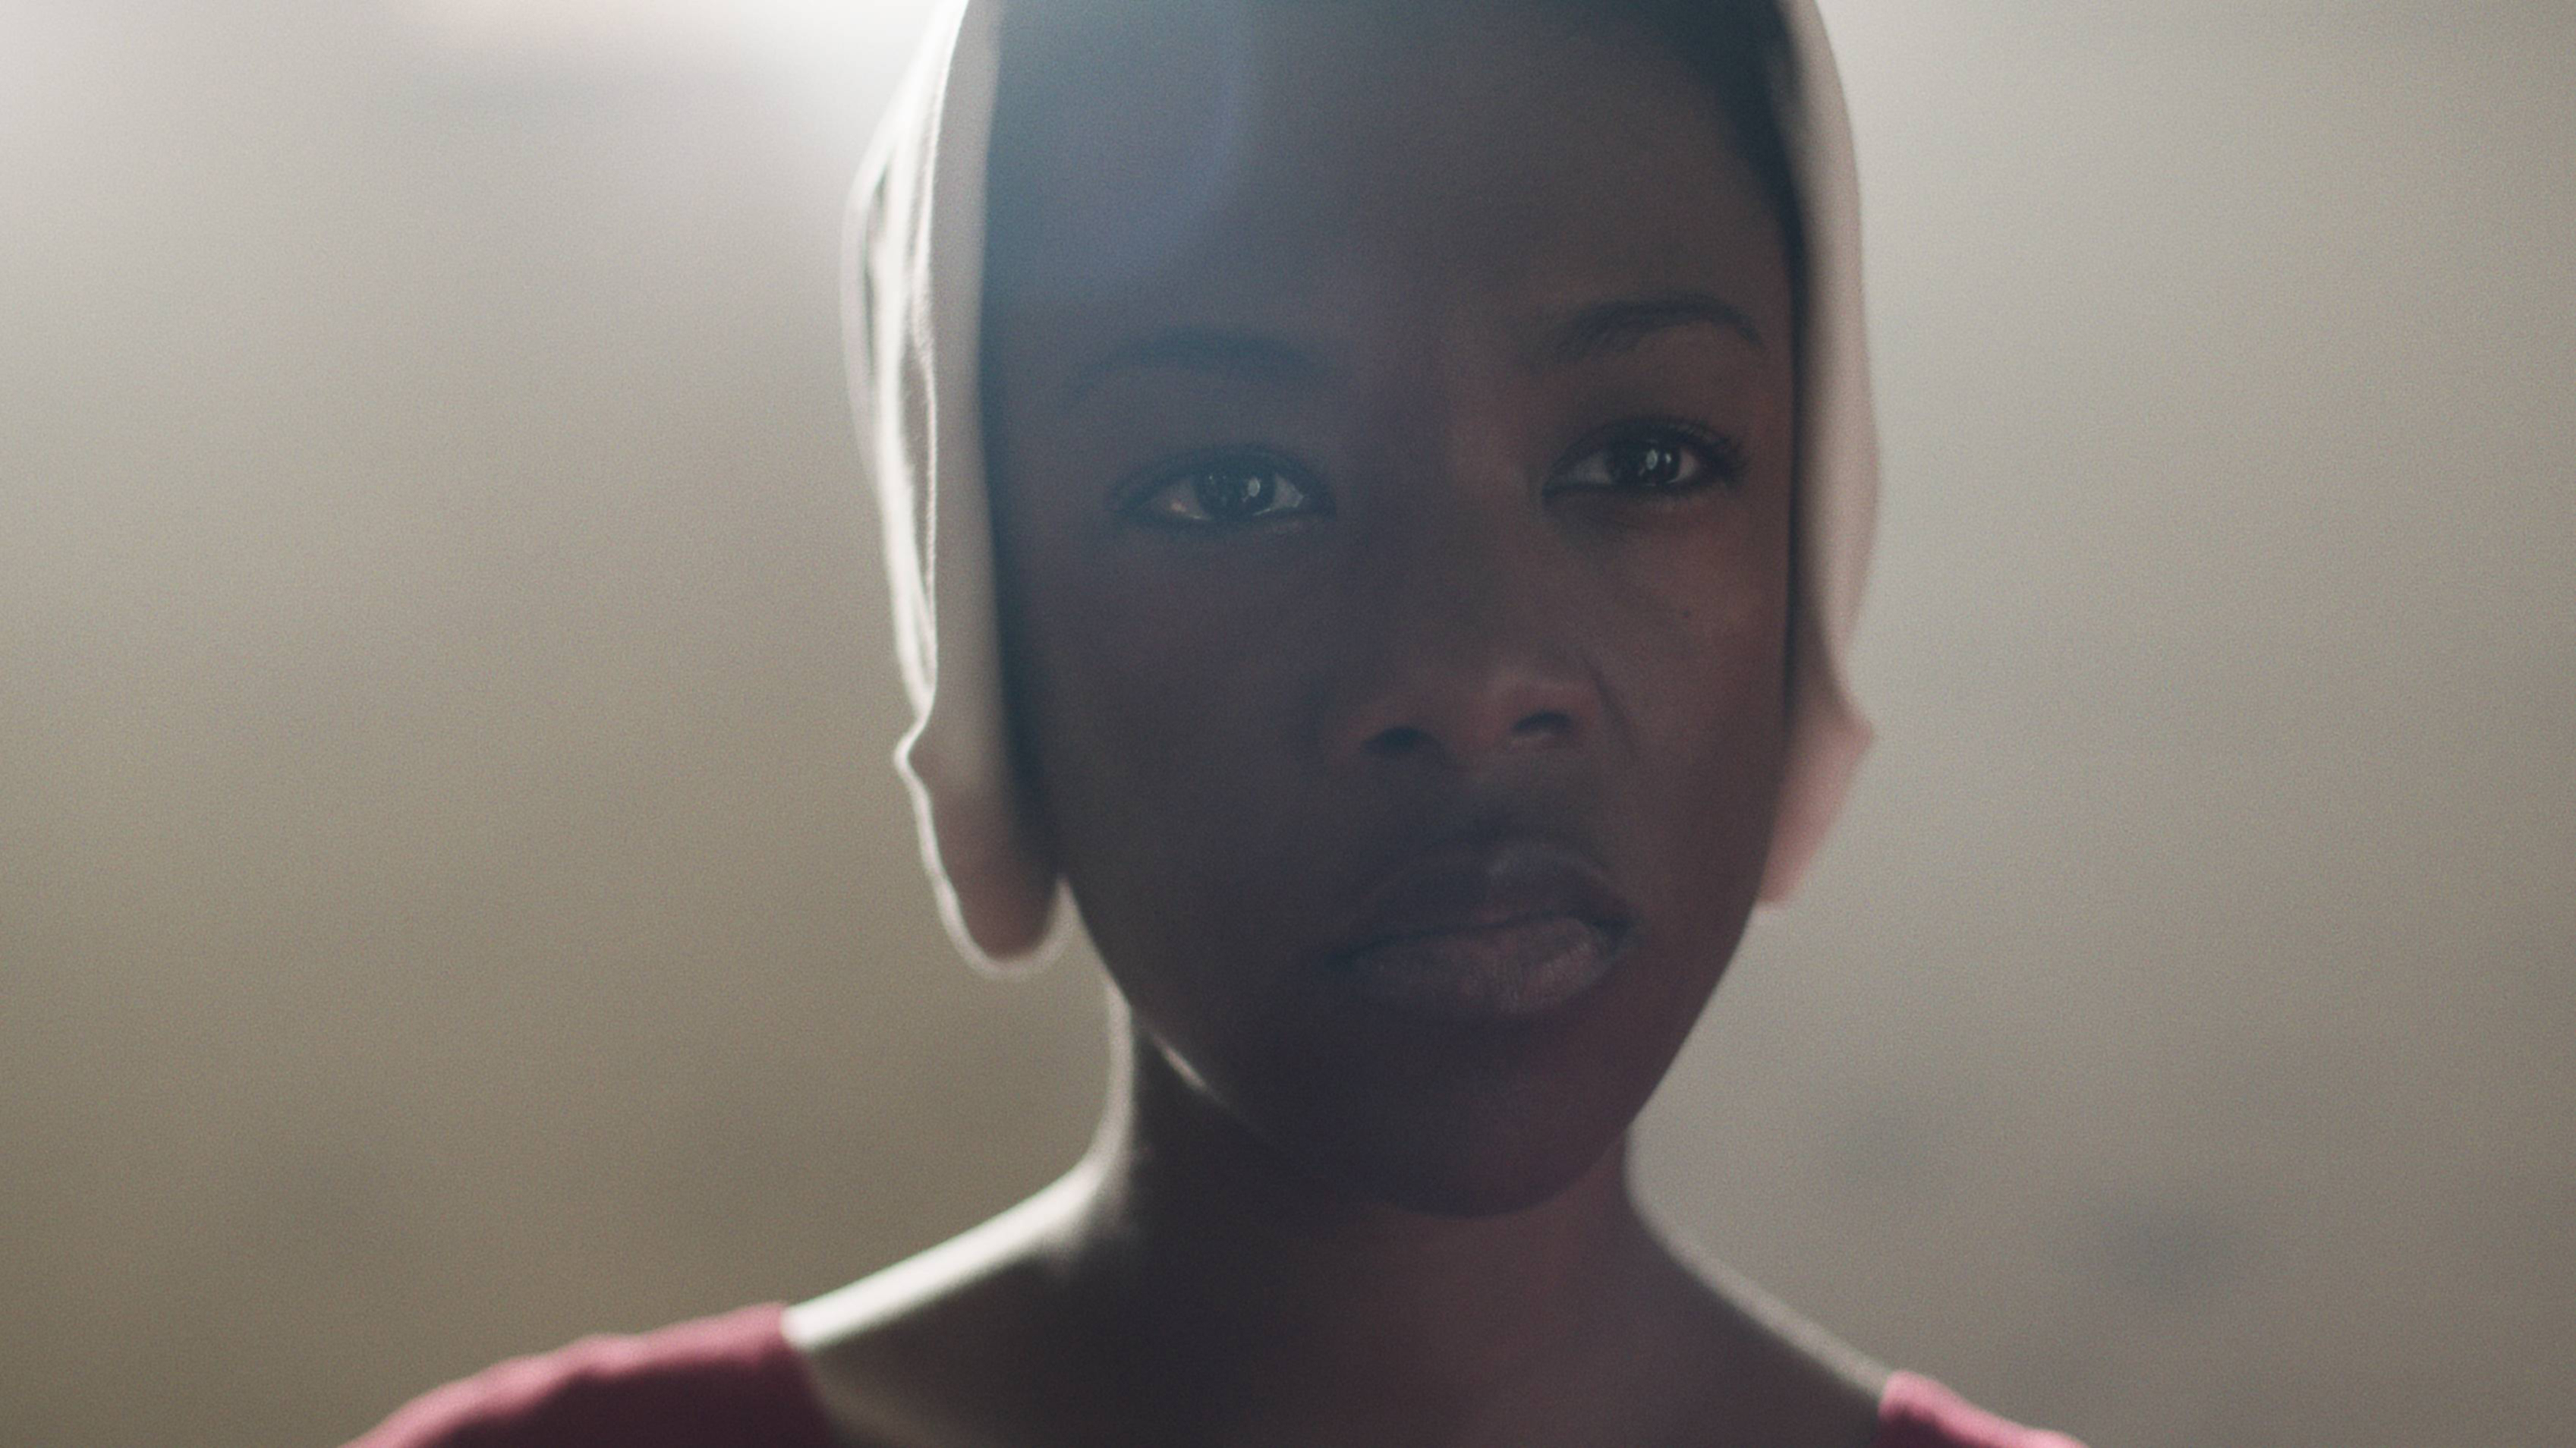 Portrait of a Samira Wiley in The Handmaid&#x27;s Tale looking directly at the camera with a neutral expression